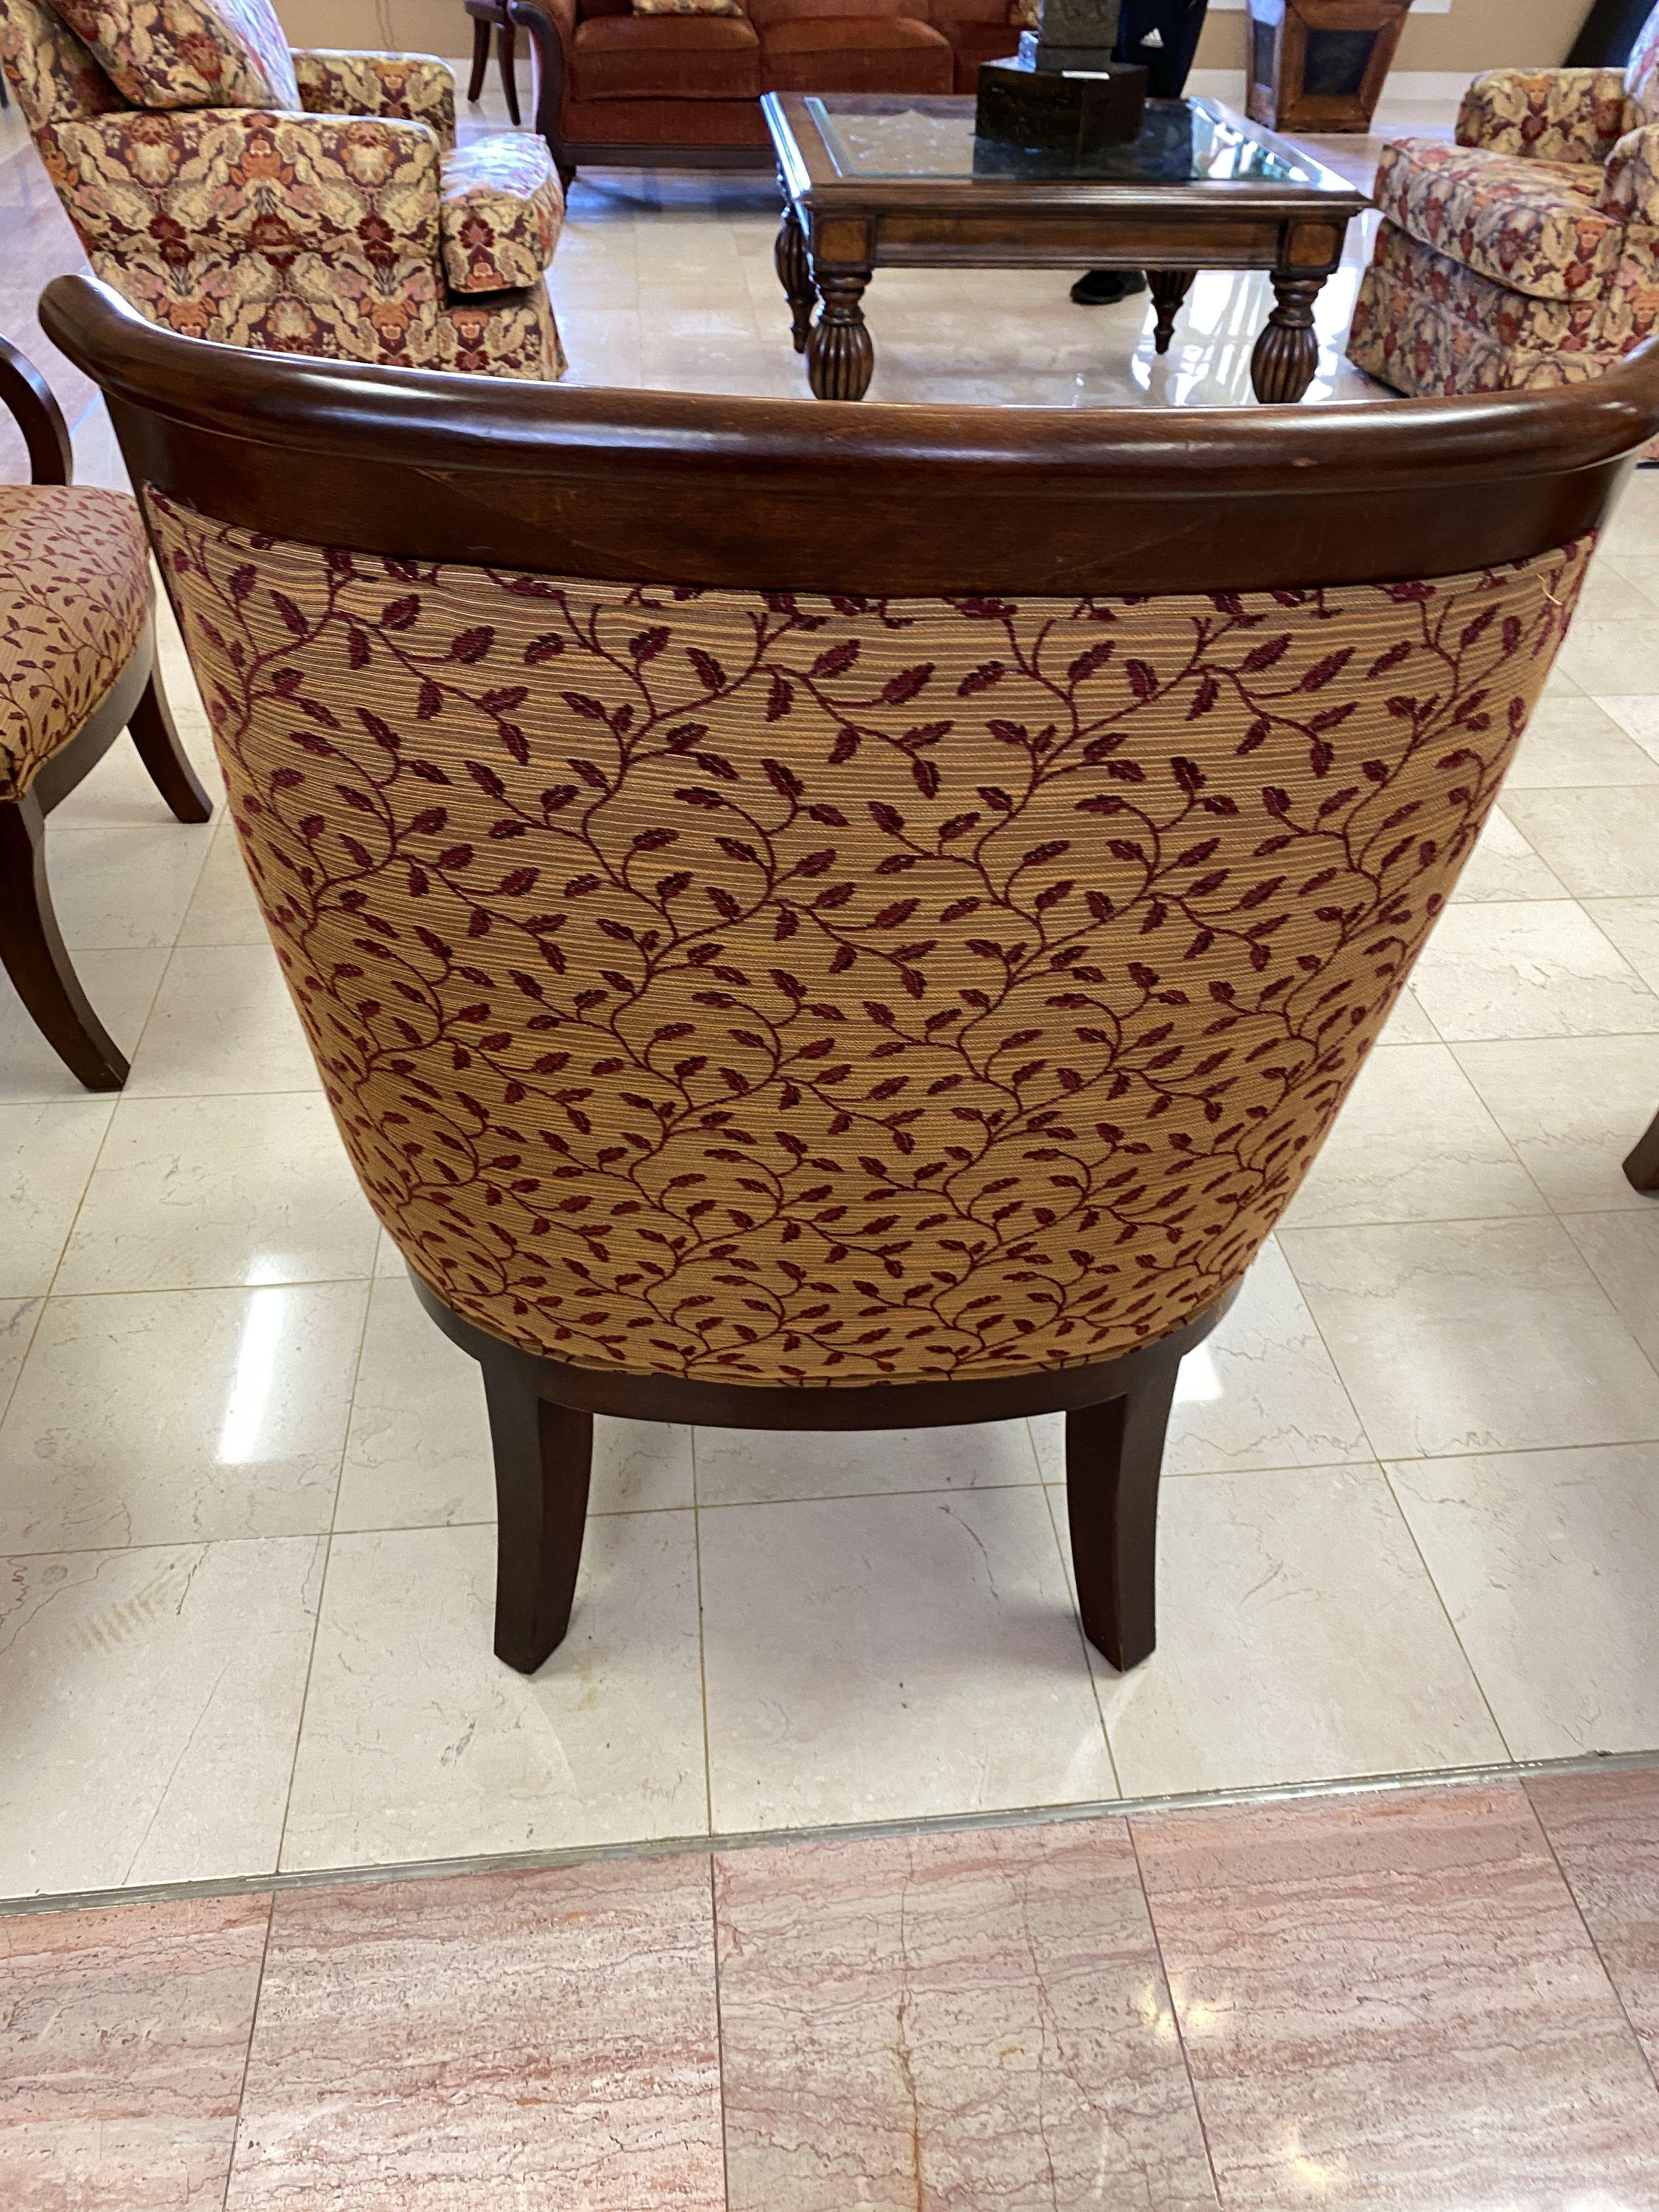 Wood Framed upholstered Chairs